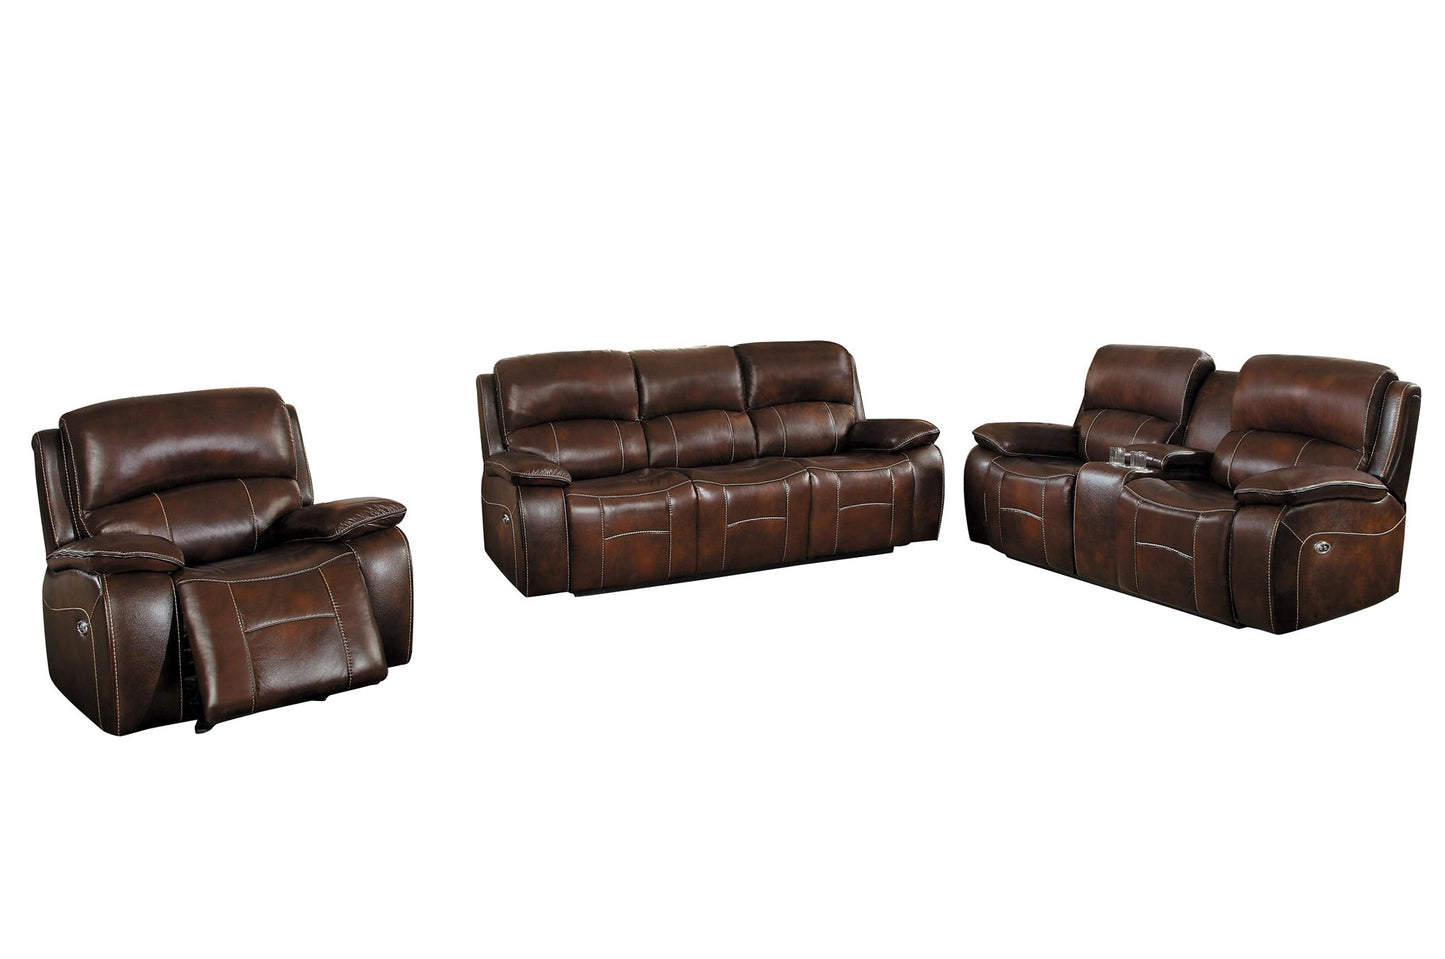 Homelegance Mahala 3PC Double Reclining Sofa, Love Seat & Glider Recliner Chair in Brown Top Grain Leather